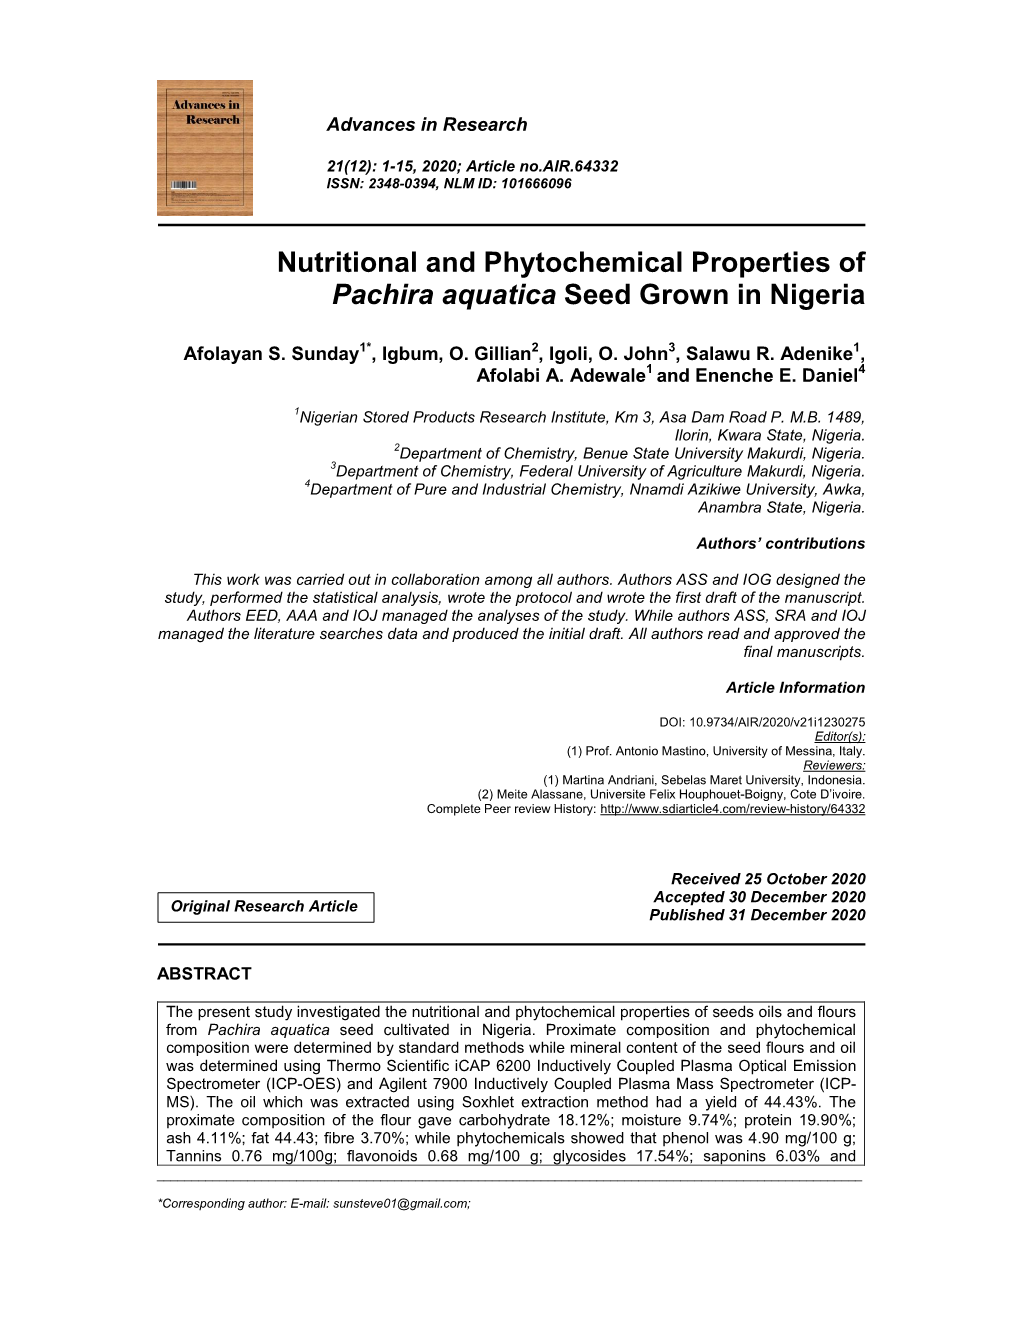 Nutritional and Phytochemical Properties of Pachira Aquatica Seed Grown in Nigeria